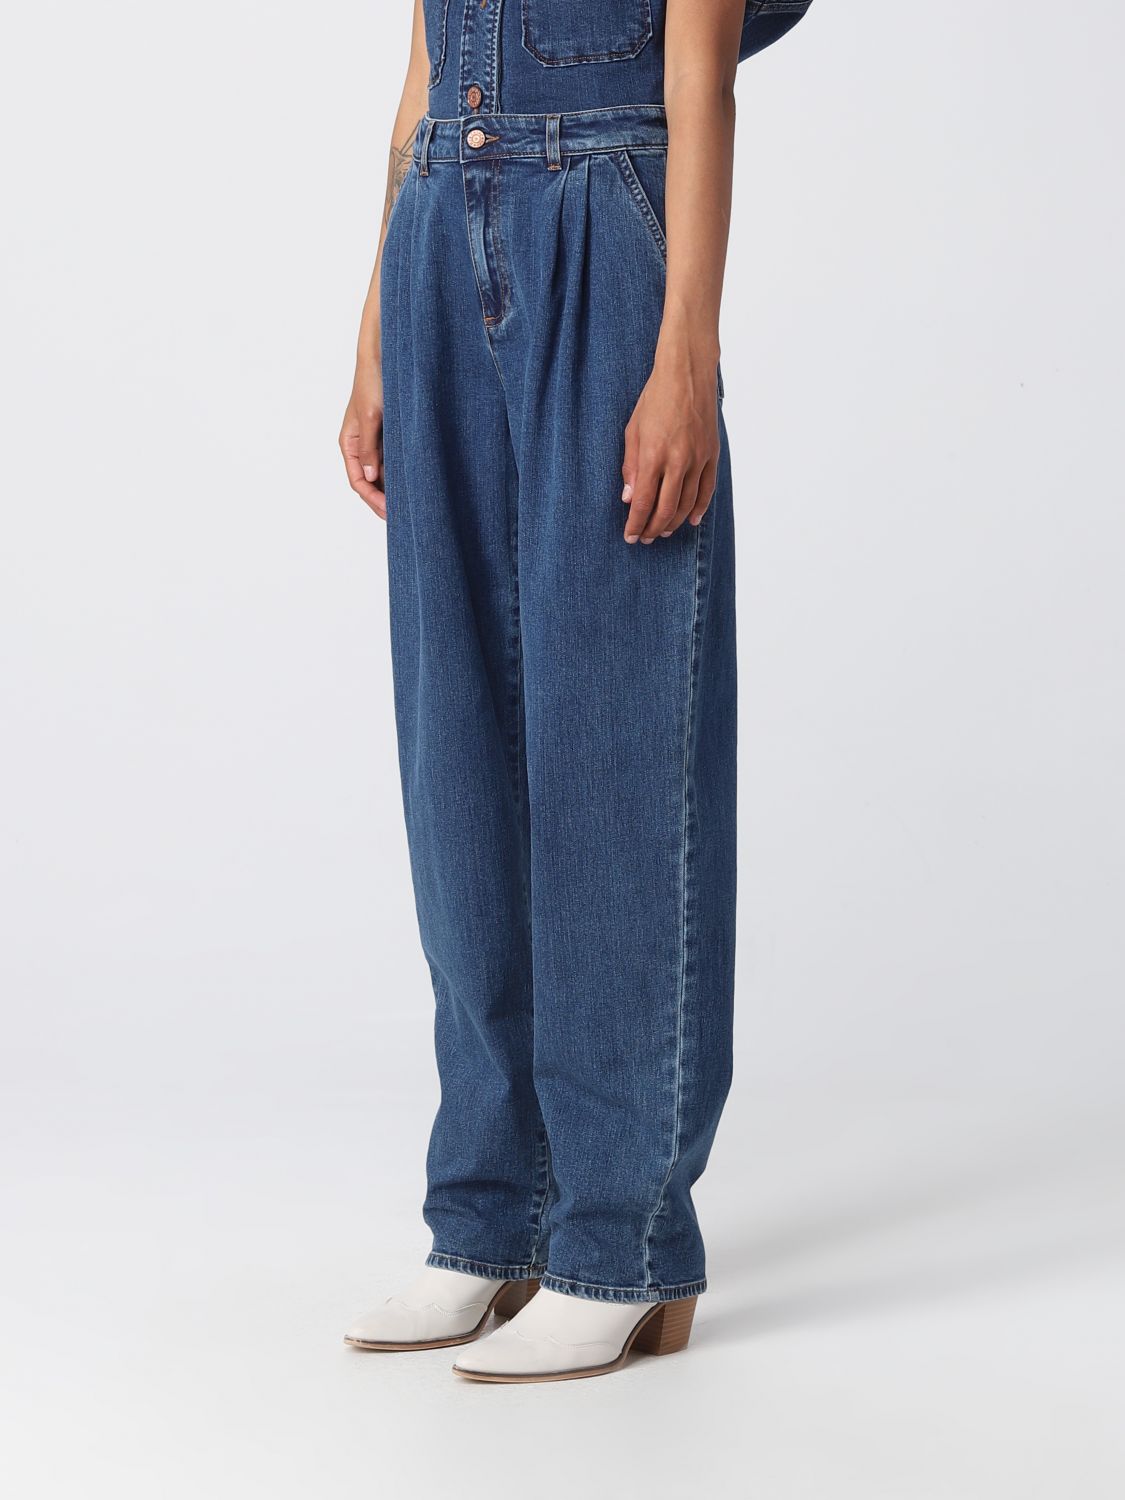 SEE BY CHLOÉ: jeans for woman - Denim | See By Chloé jeans ...